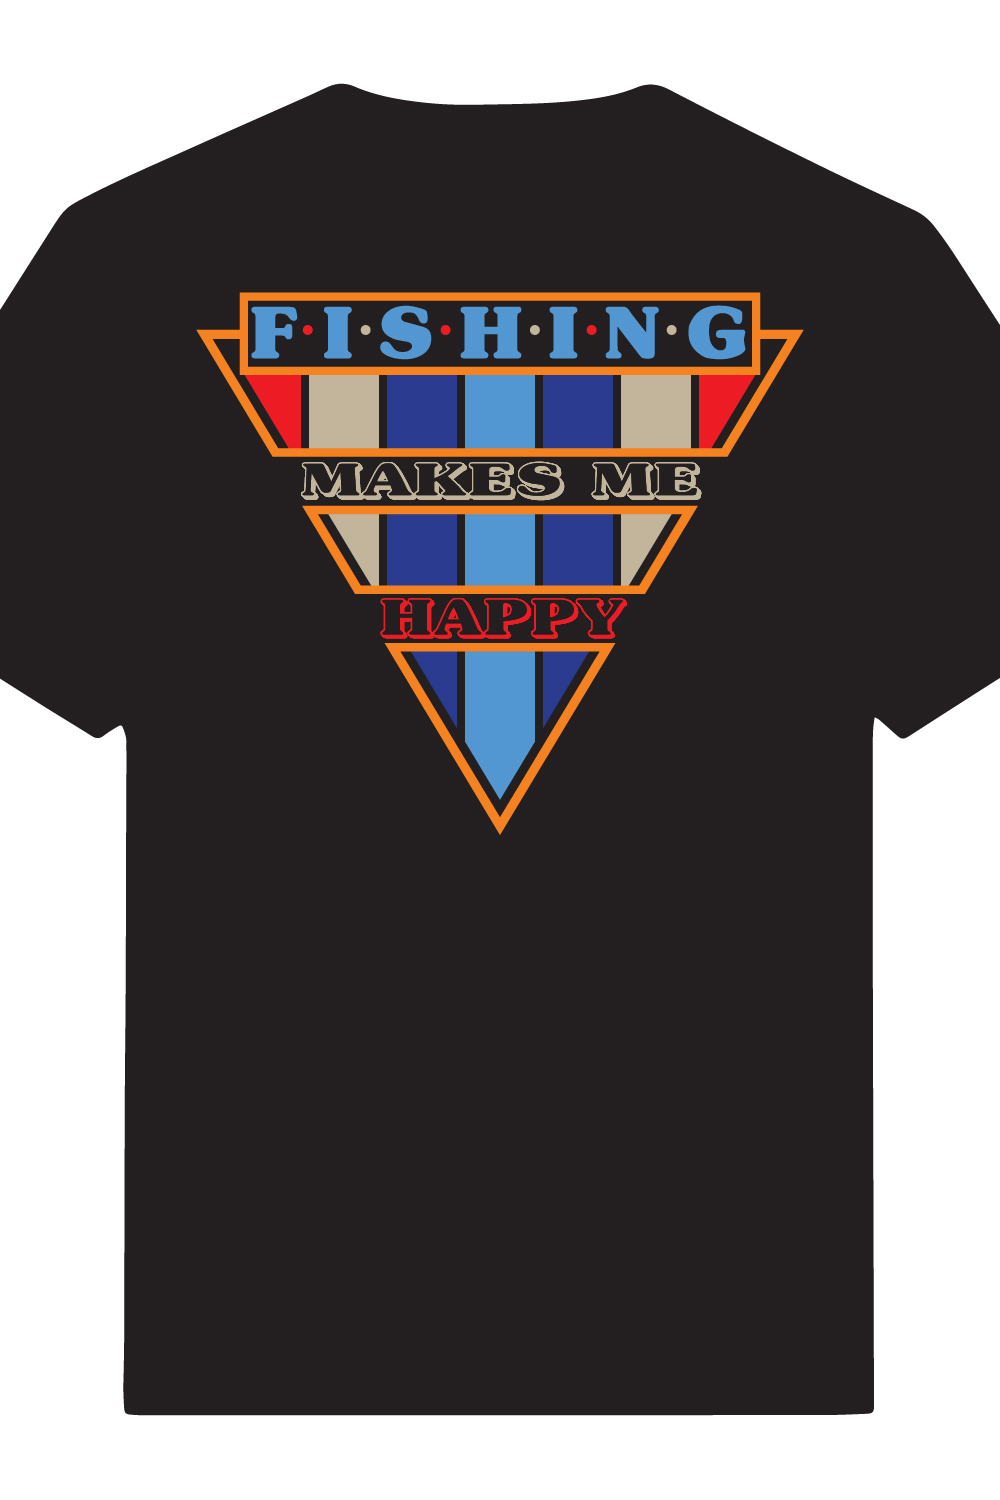 Fishing makes me happy typography t-shirt design pinterest preview image.